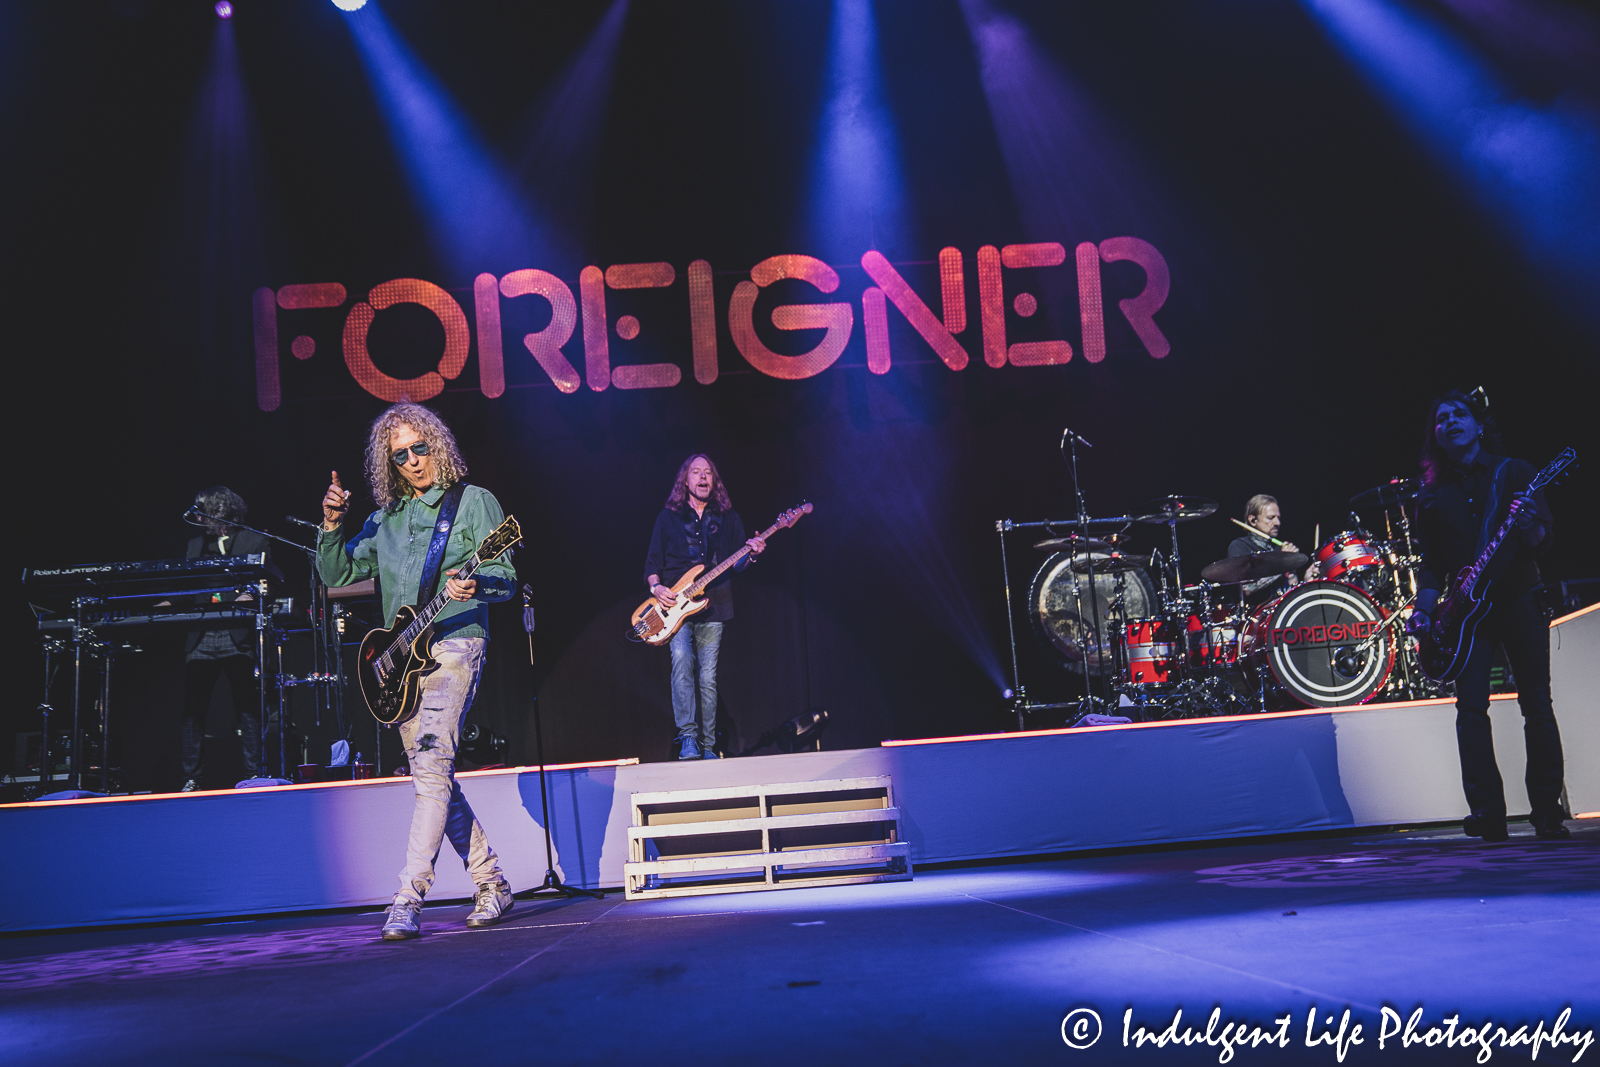 Foreigner band members Michael Bluestein, Bruce Watson, Jeff Pilson, Chris Frazier and Luis Maldonado in concert together at Hartman Arena in Park City, KS on April 30, 2023.